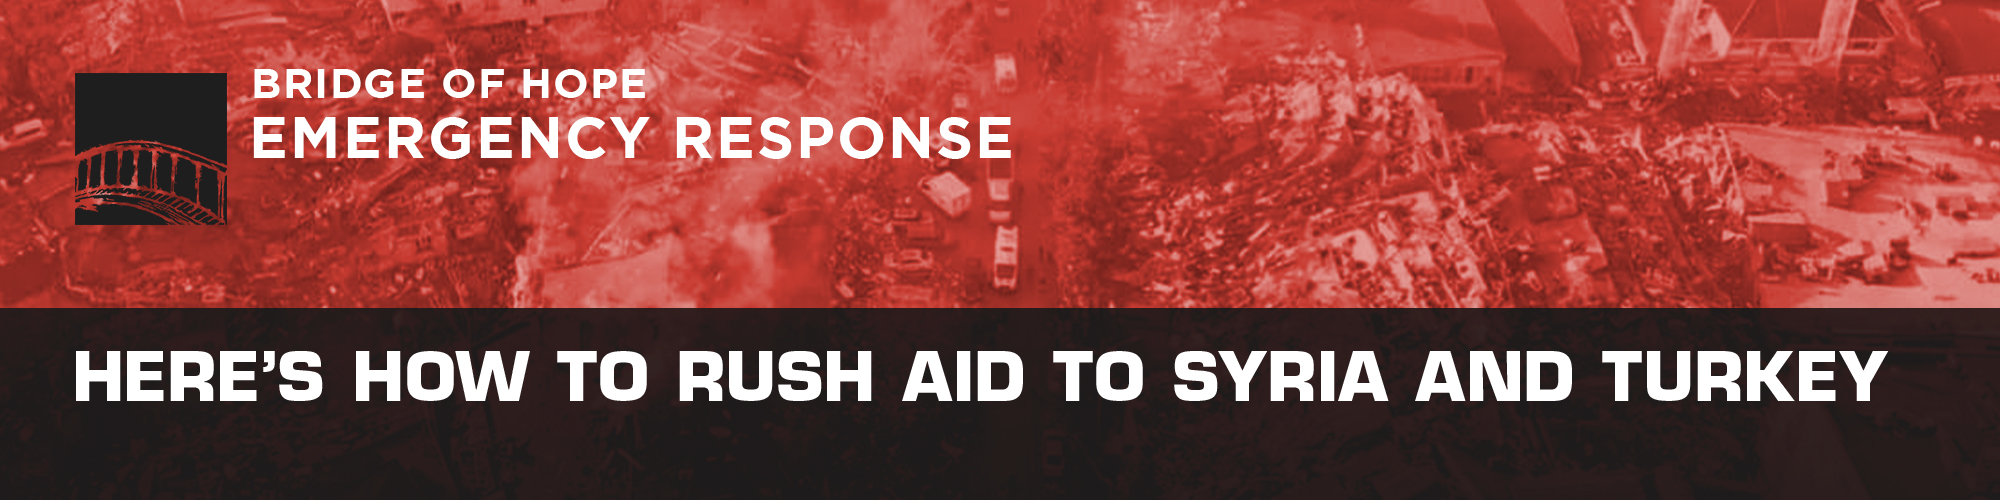 Bridge of Hope Emergency Response Here's How to Rush Aid to Syria and Turkey